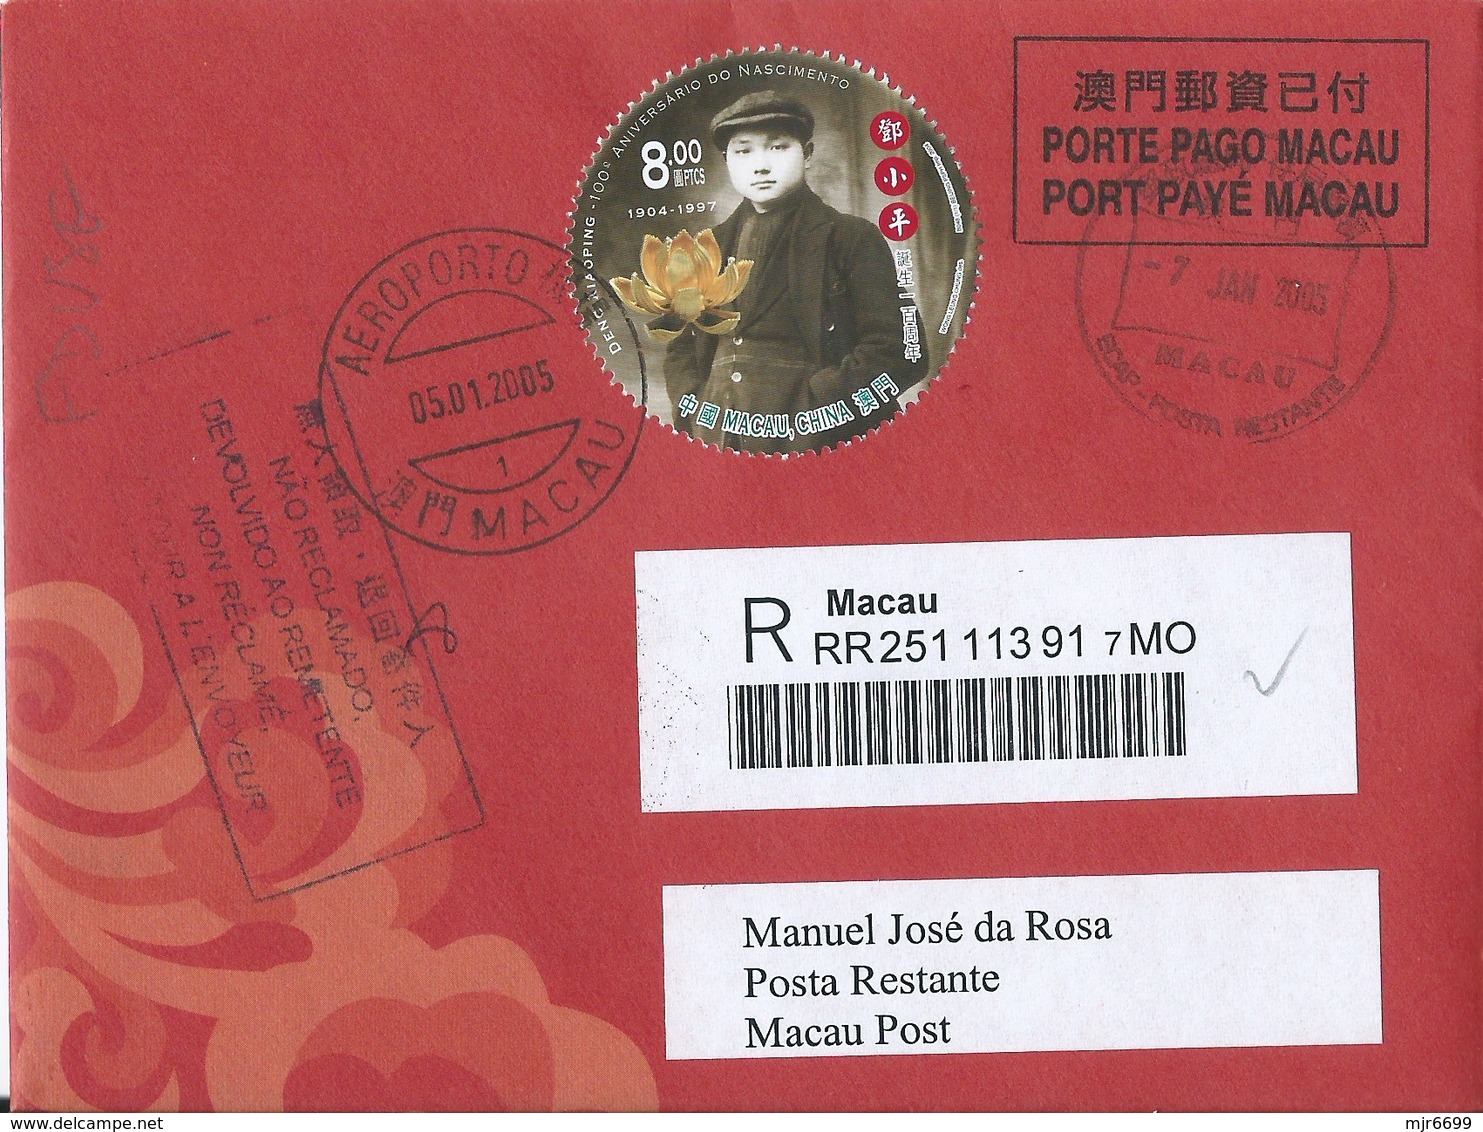 MACAU 2005 LUNAR NEW YEAR OF THE COCK GREETING CARD & POSTAGE PAID REG COVER 1ST DAY LOCAL USAGE - Enteros Postales